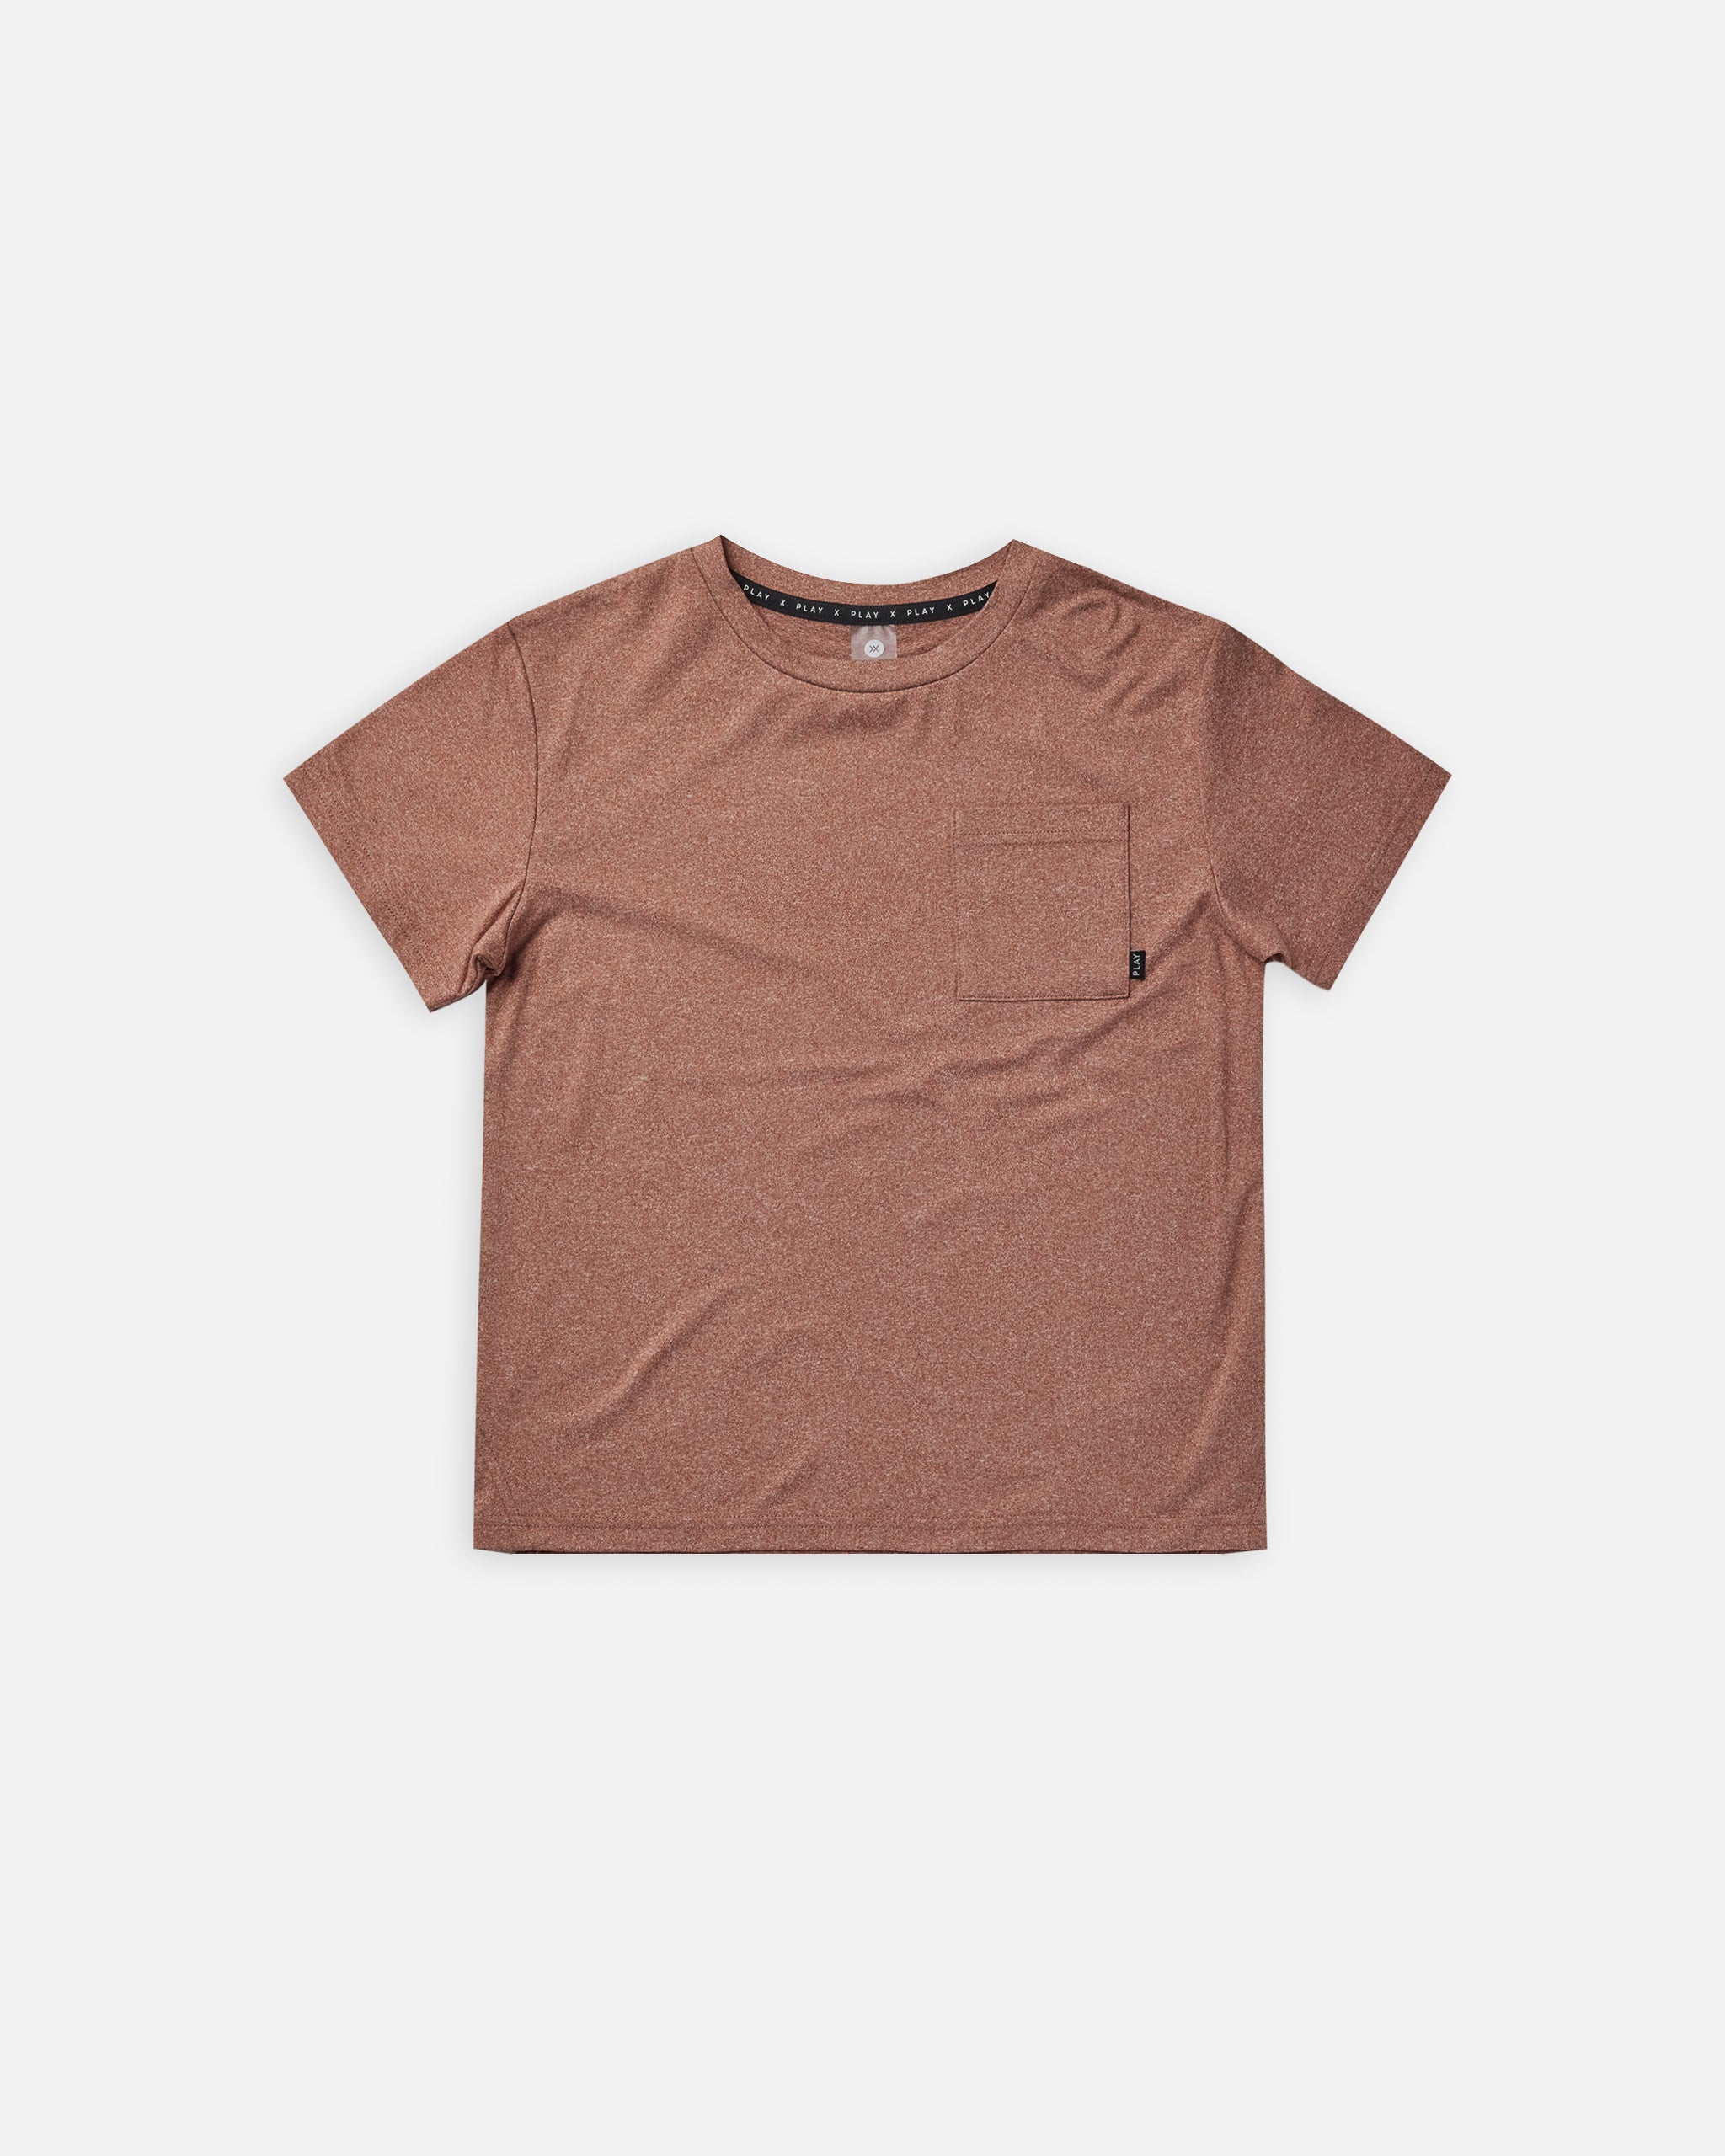 Pacific Tech Tee | brick - Rylee + Cru | Kids Clothes | Trendy Baby Clothes | Modern Infant Outfits |